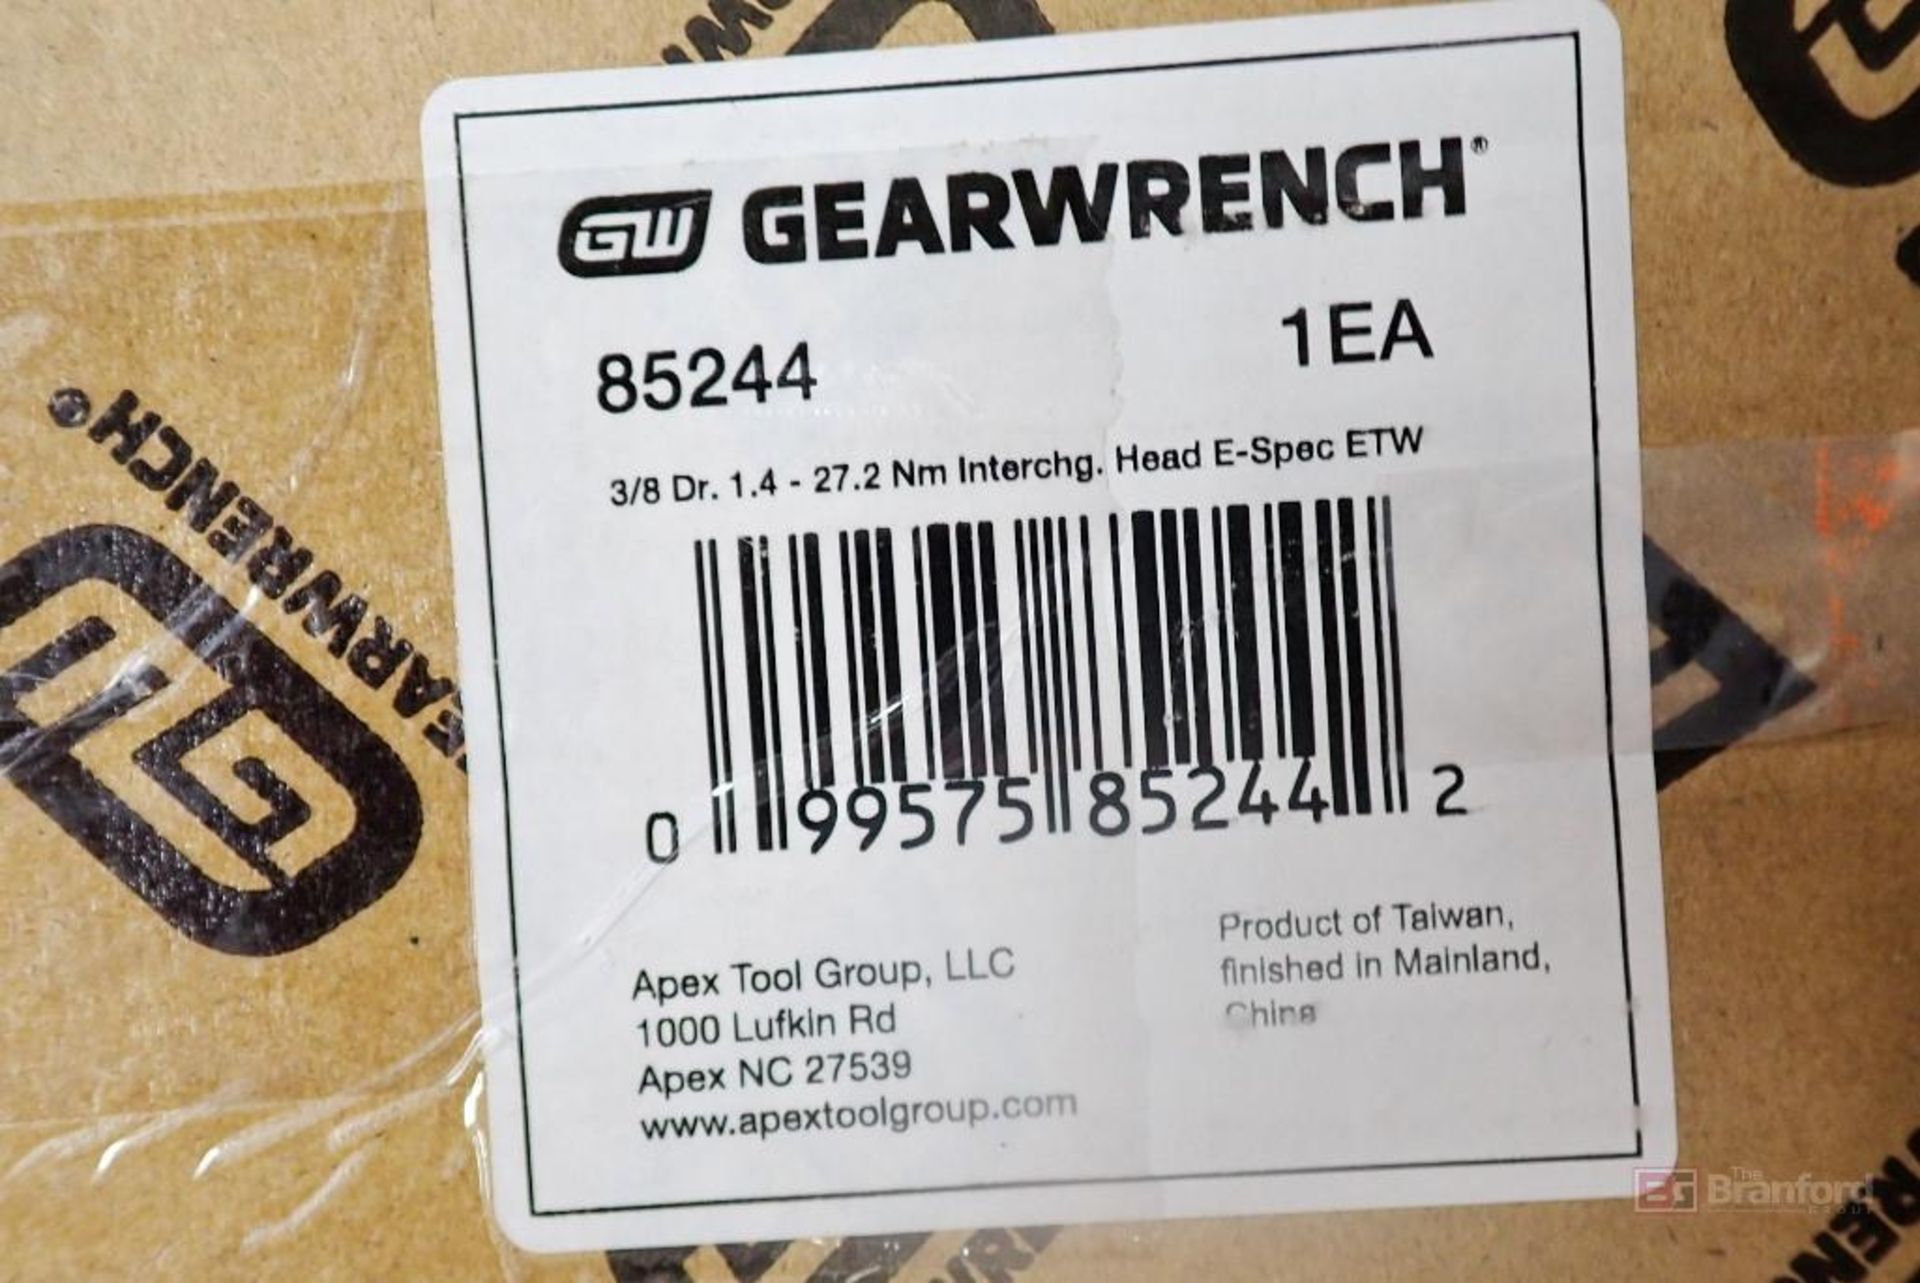 GearWrench 85244-01 3/8" Drive Interchangable Head E-Spec Electronic Torque Wrench - Image 2 of 5